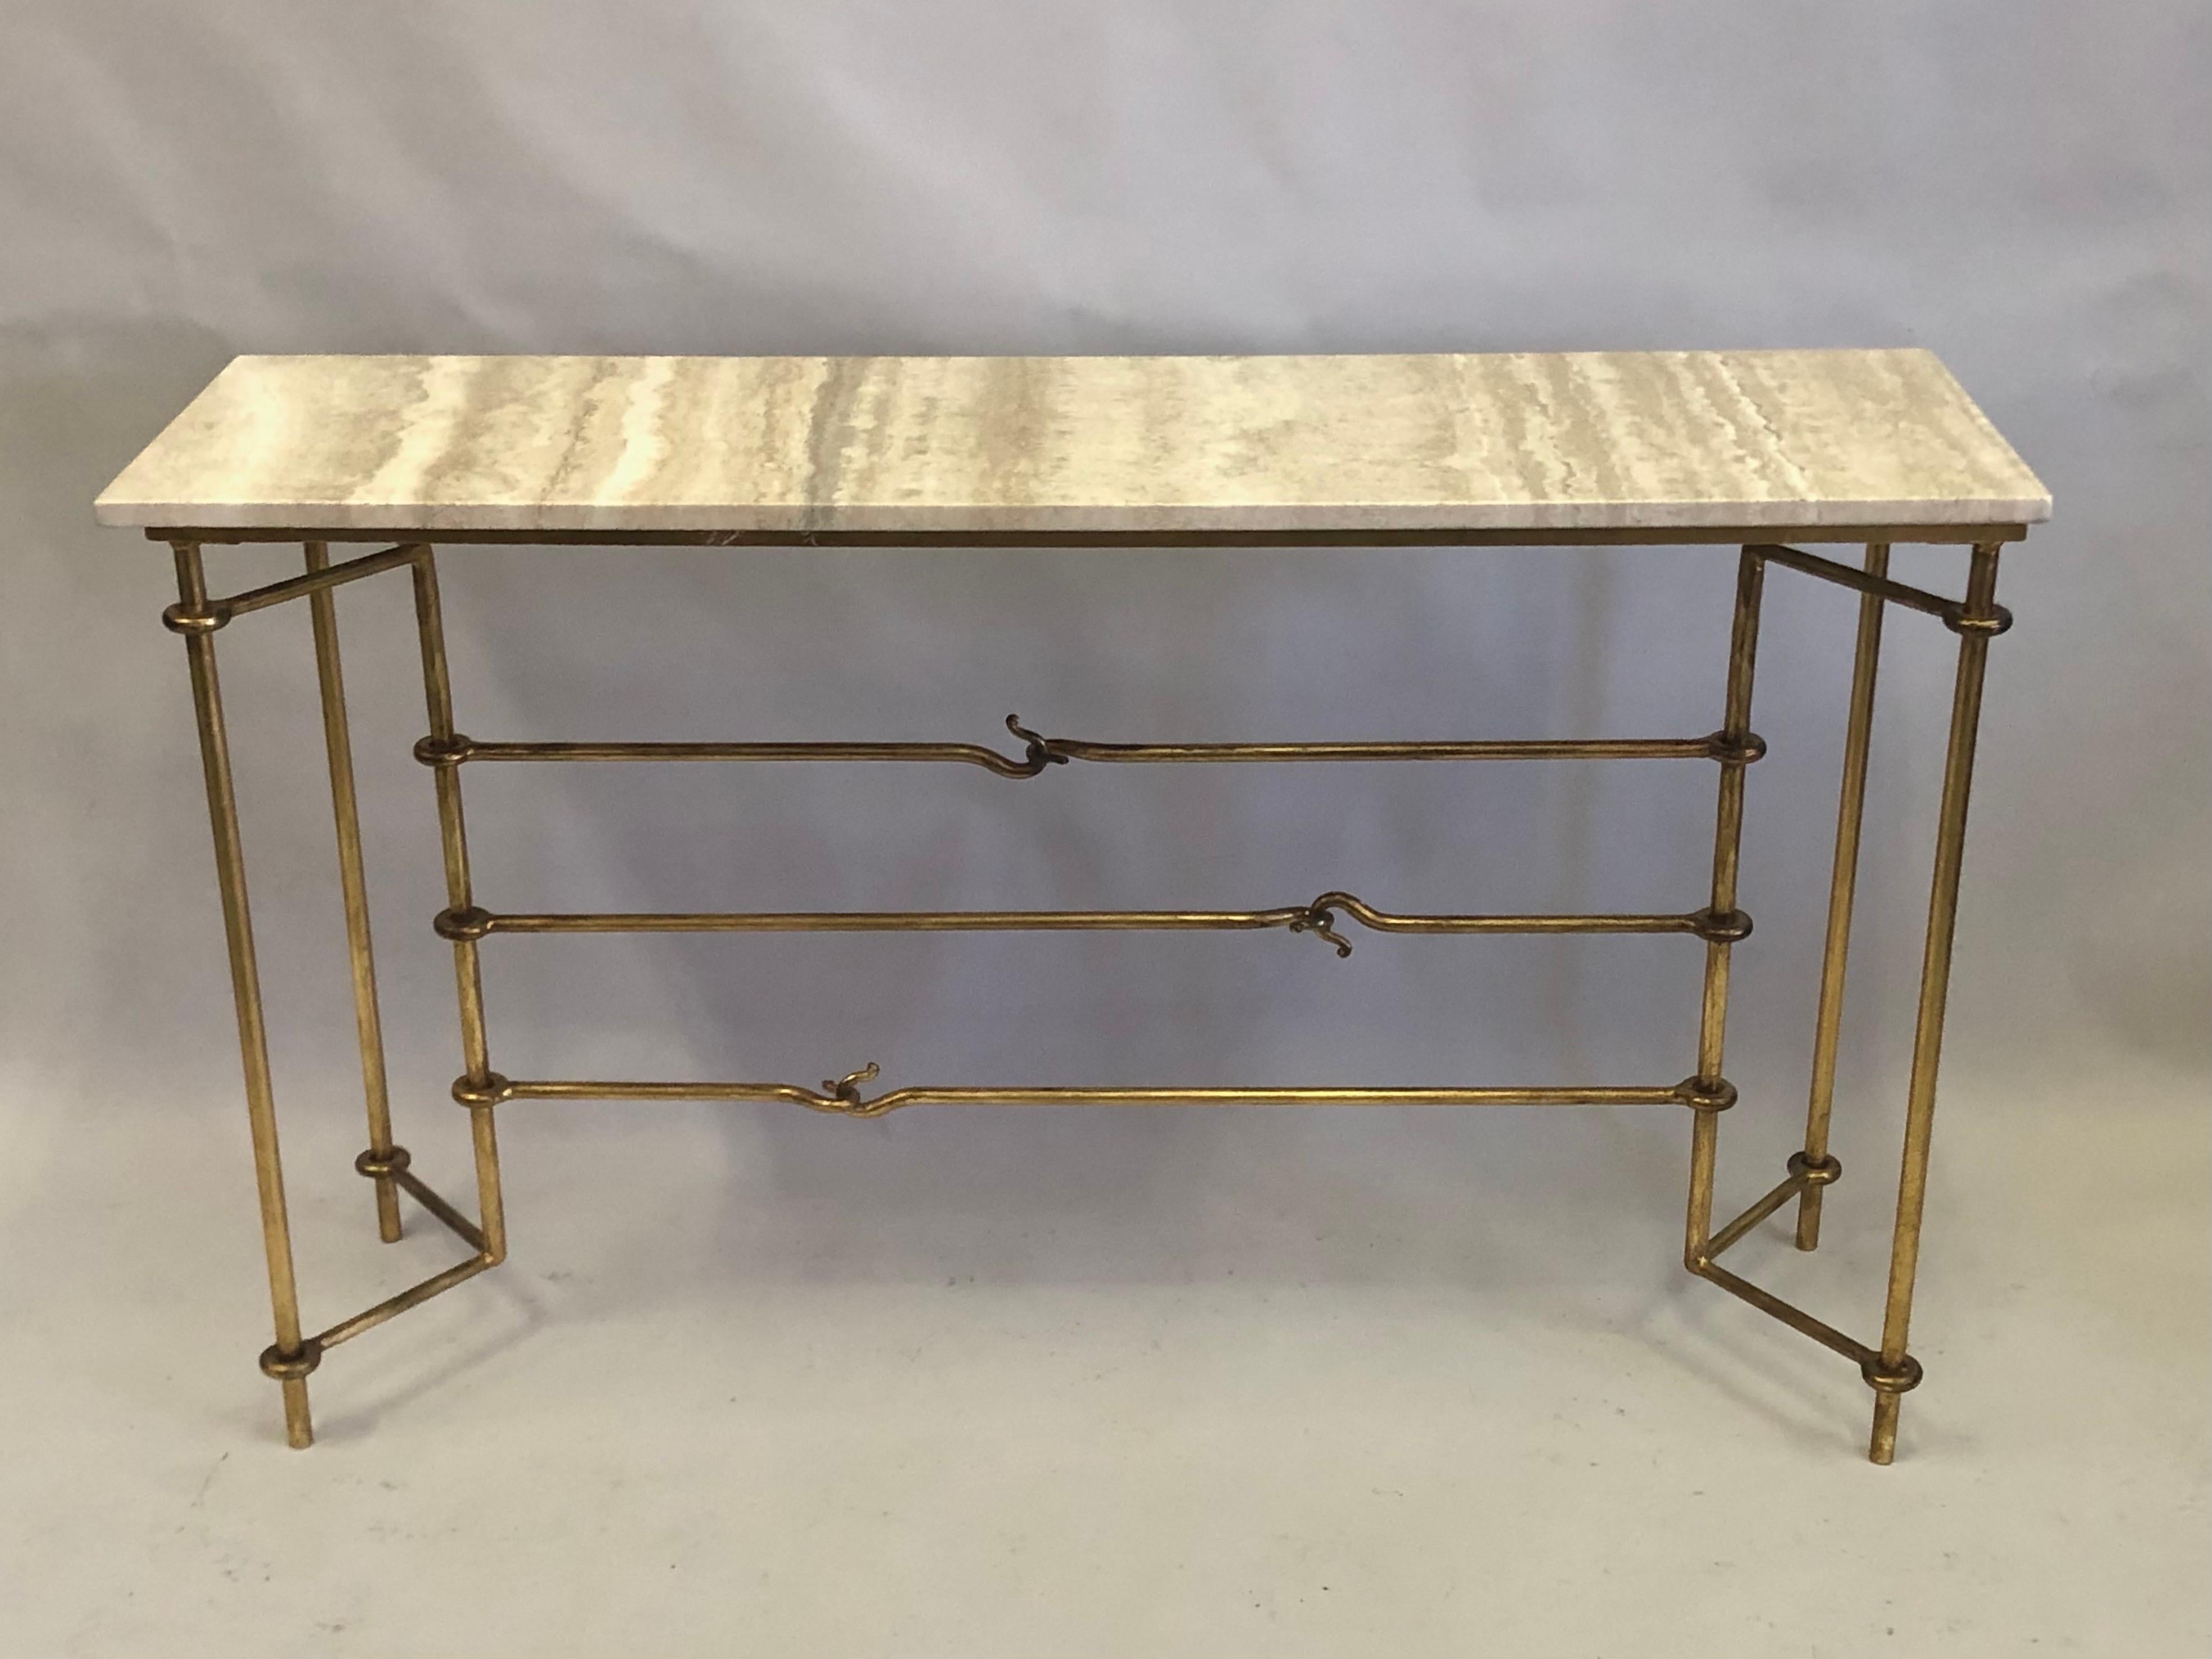 Exquisite Italian Modern neoclassical console in classic Hermes styling featuring horse hardware motifs. The console / sofa table is in hand hammered and gilt iron by Giovanni Banci for Hermes. The top is in Roman travertine. 

Dimensions: H 32 x